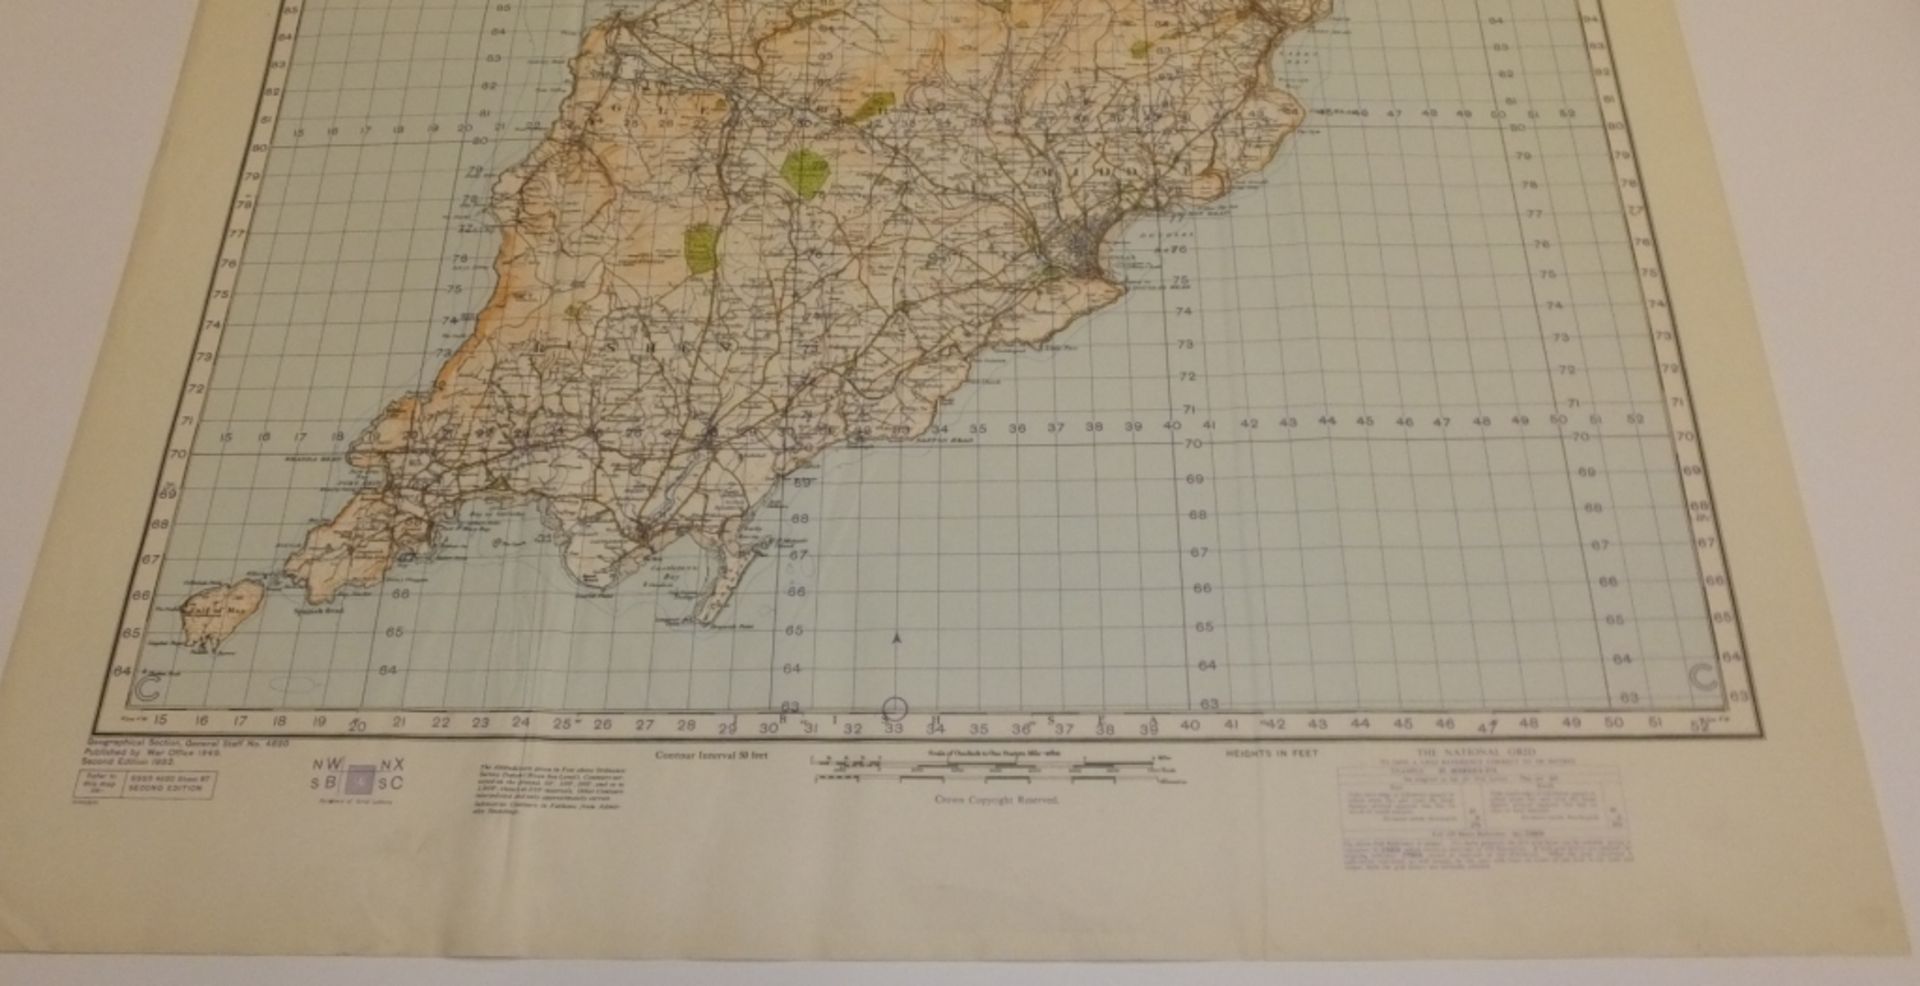 25x ENGLAND & WALES MAP ISLE OF MAN 1INCH 1MILE 1952 2ND EDITION 4620GSGS SHEET 87 - Bild 3 aus 4